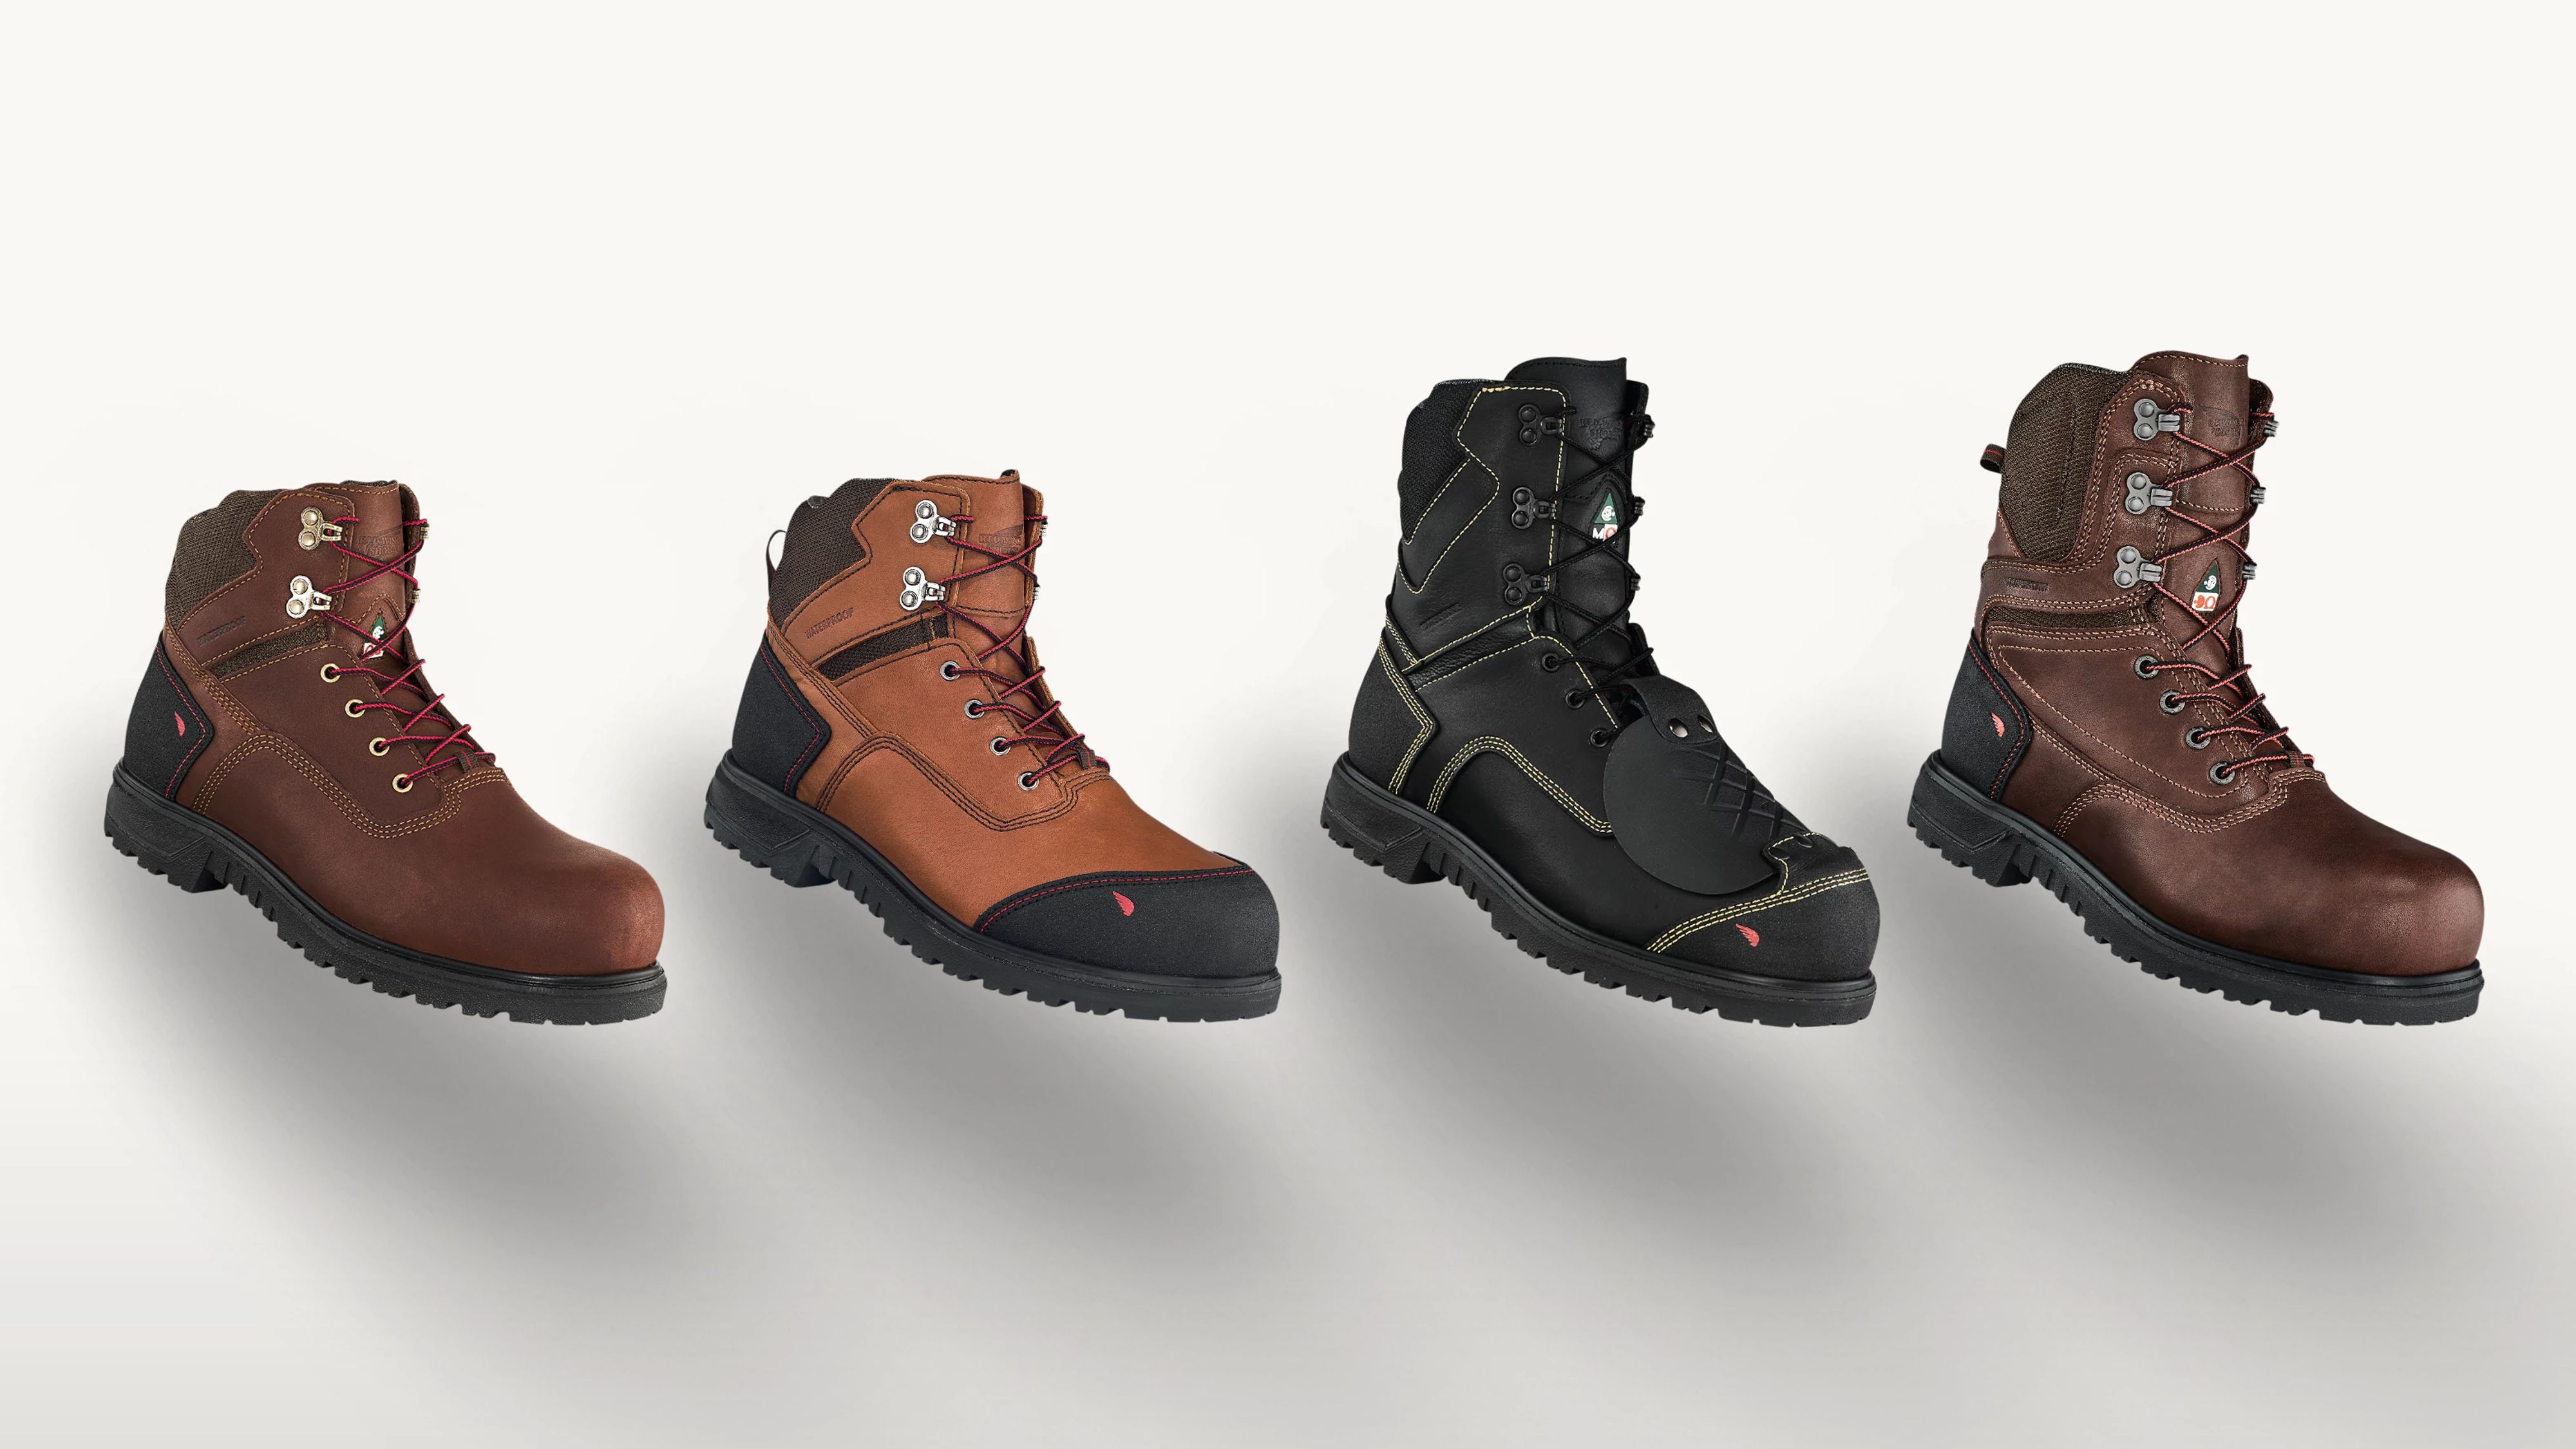 Four style of Red Wing BRNR boots